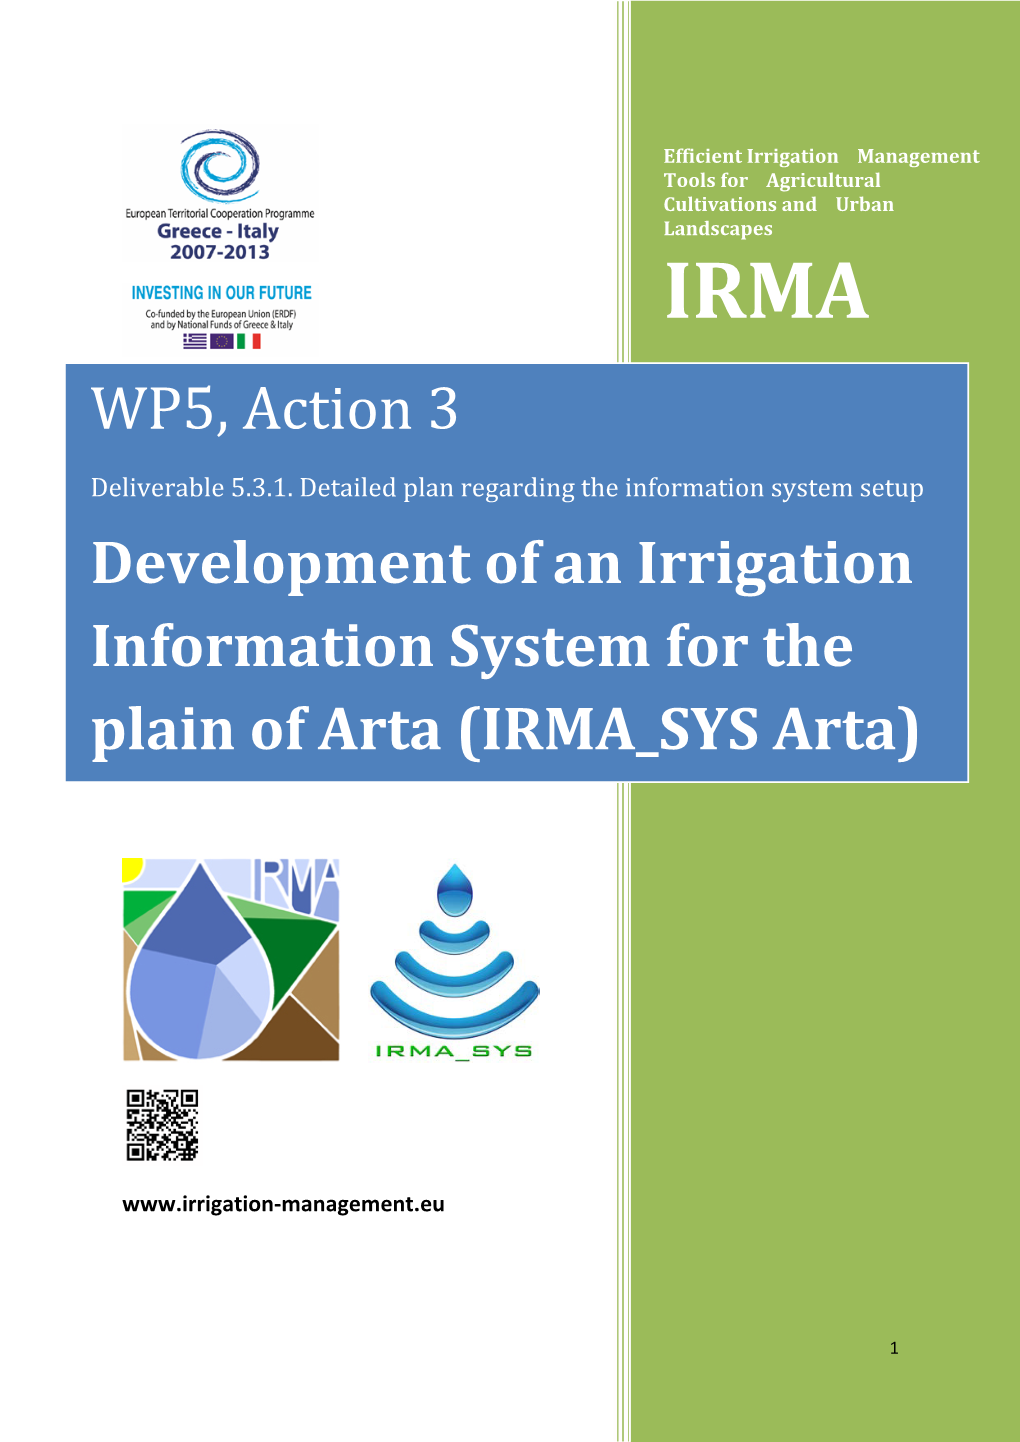 WP5, Action 3 Development of an Irrigation Information System for The